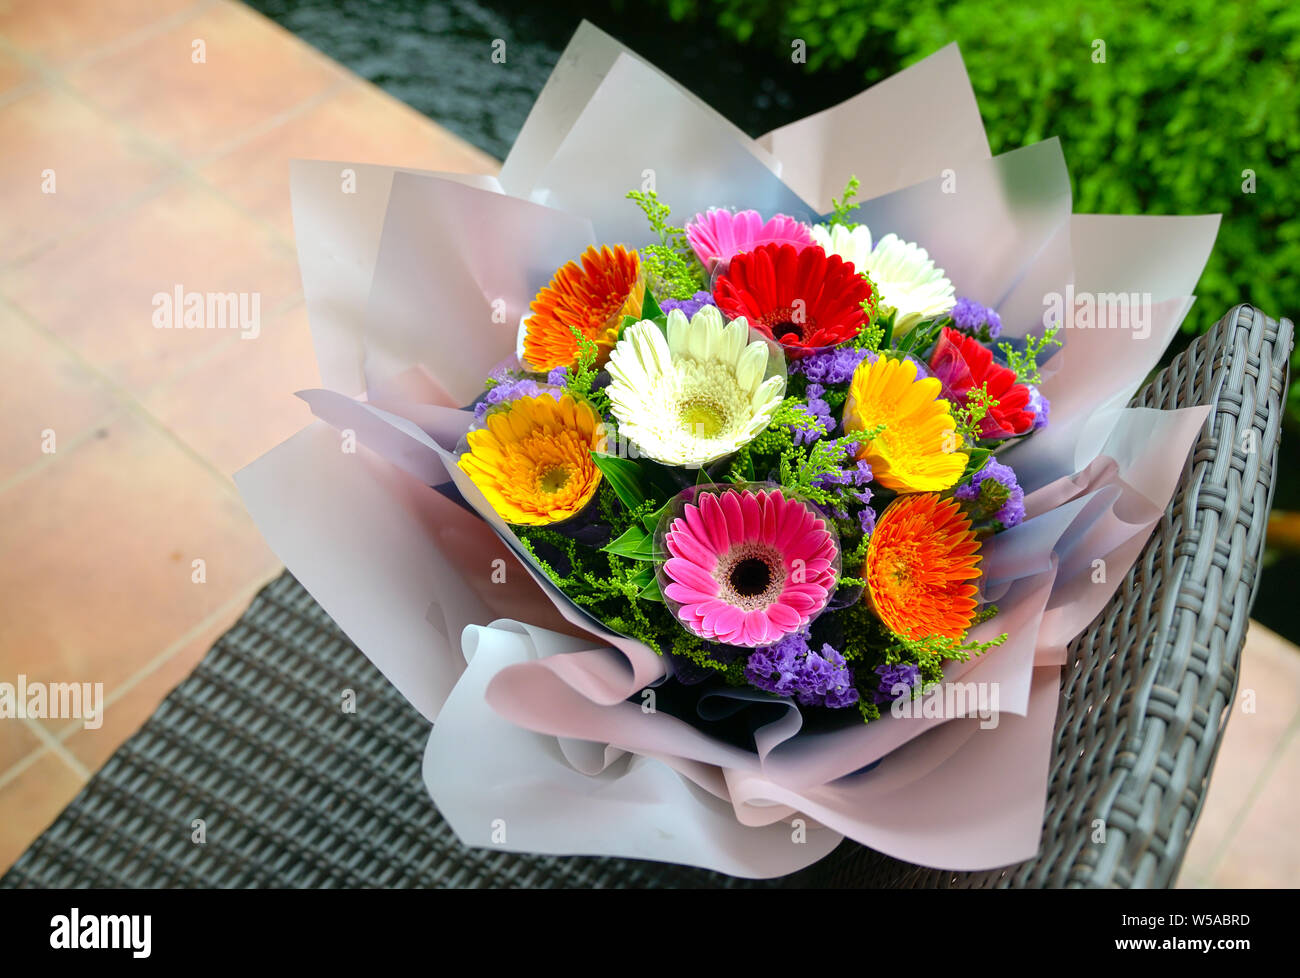 Colorful hand bouquet of Gerbera Daisy flowers Stock Photo - Alamy